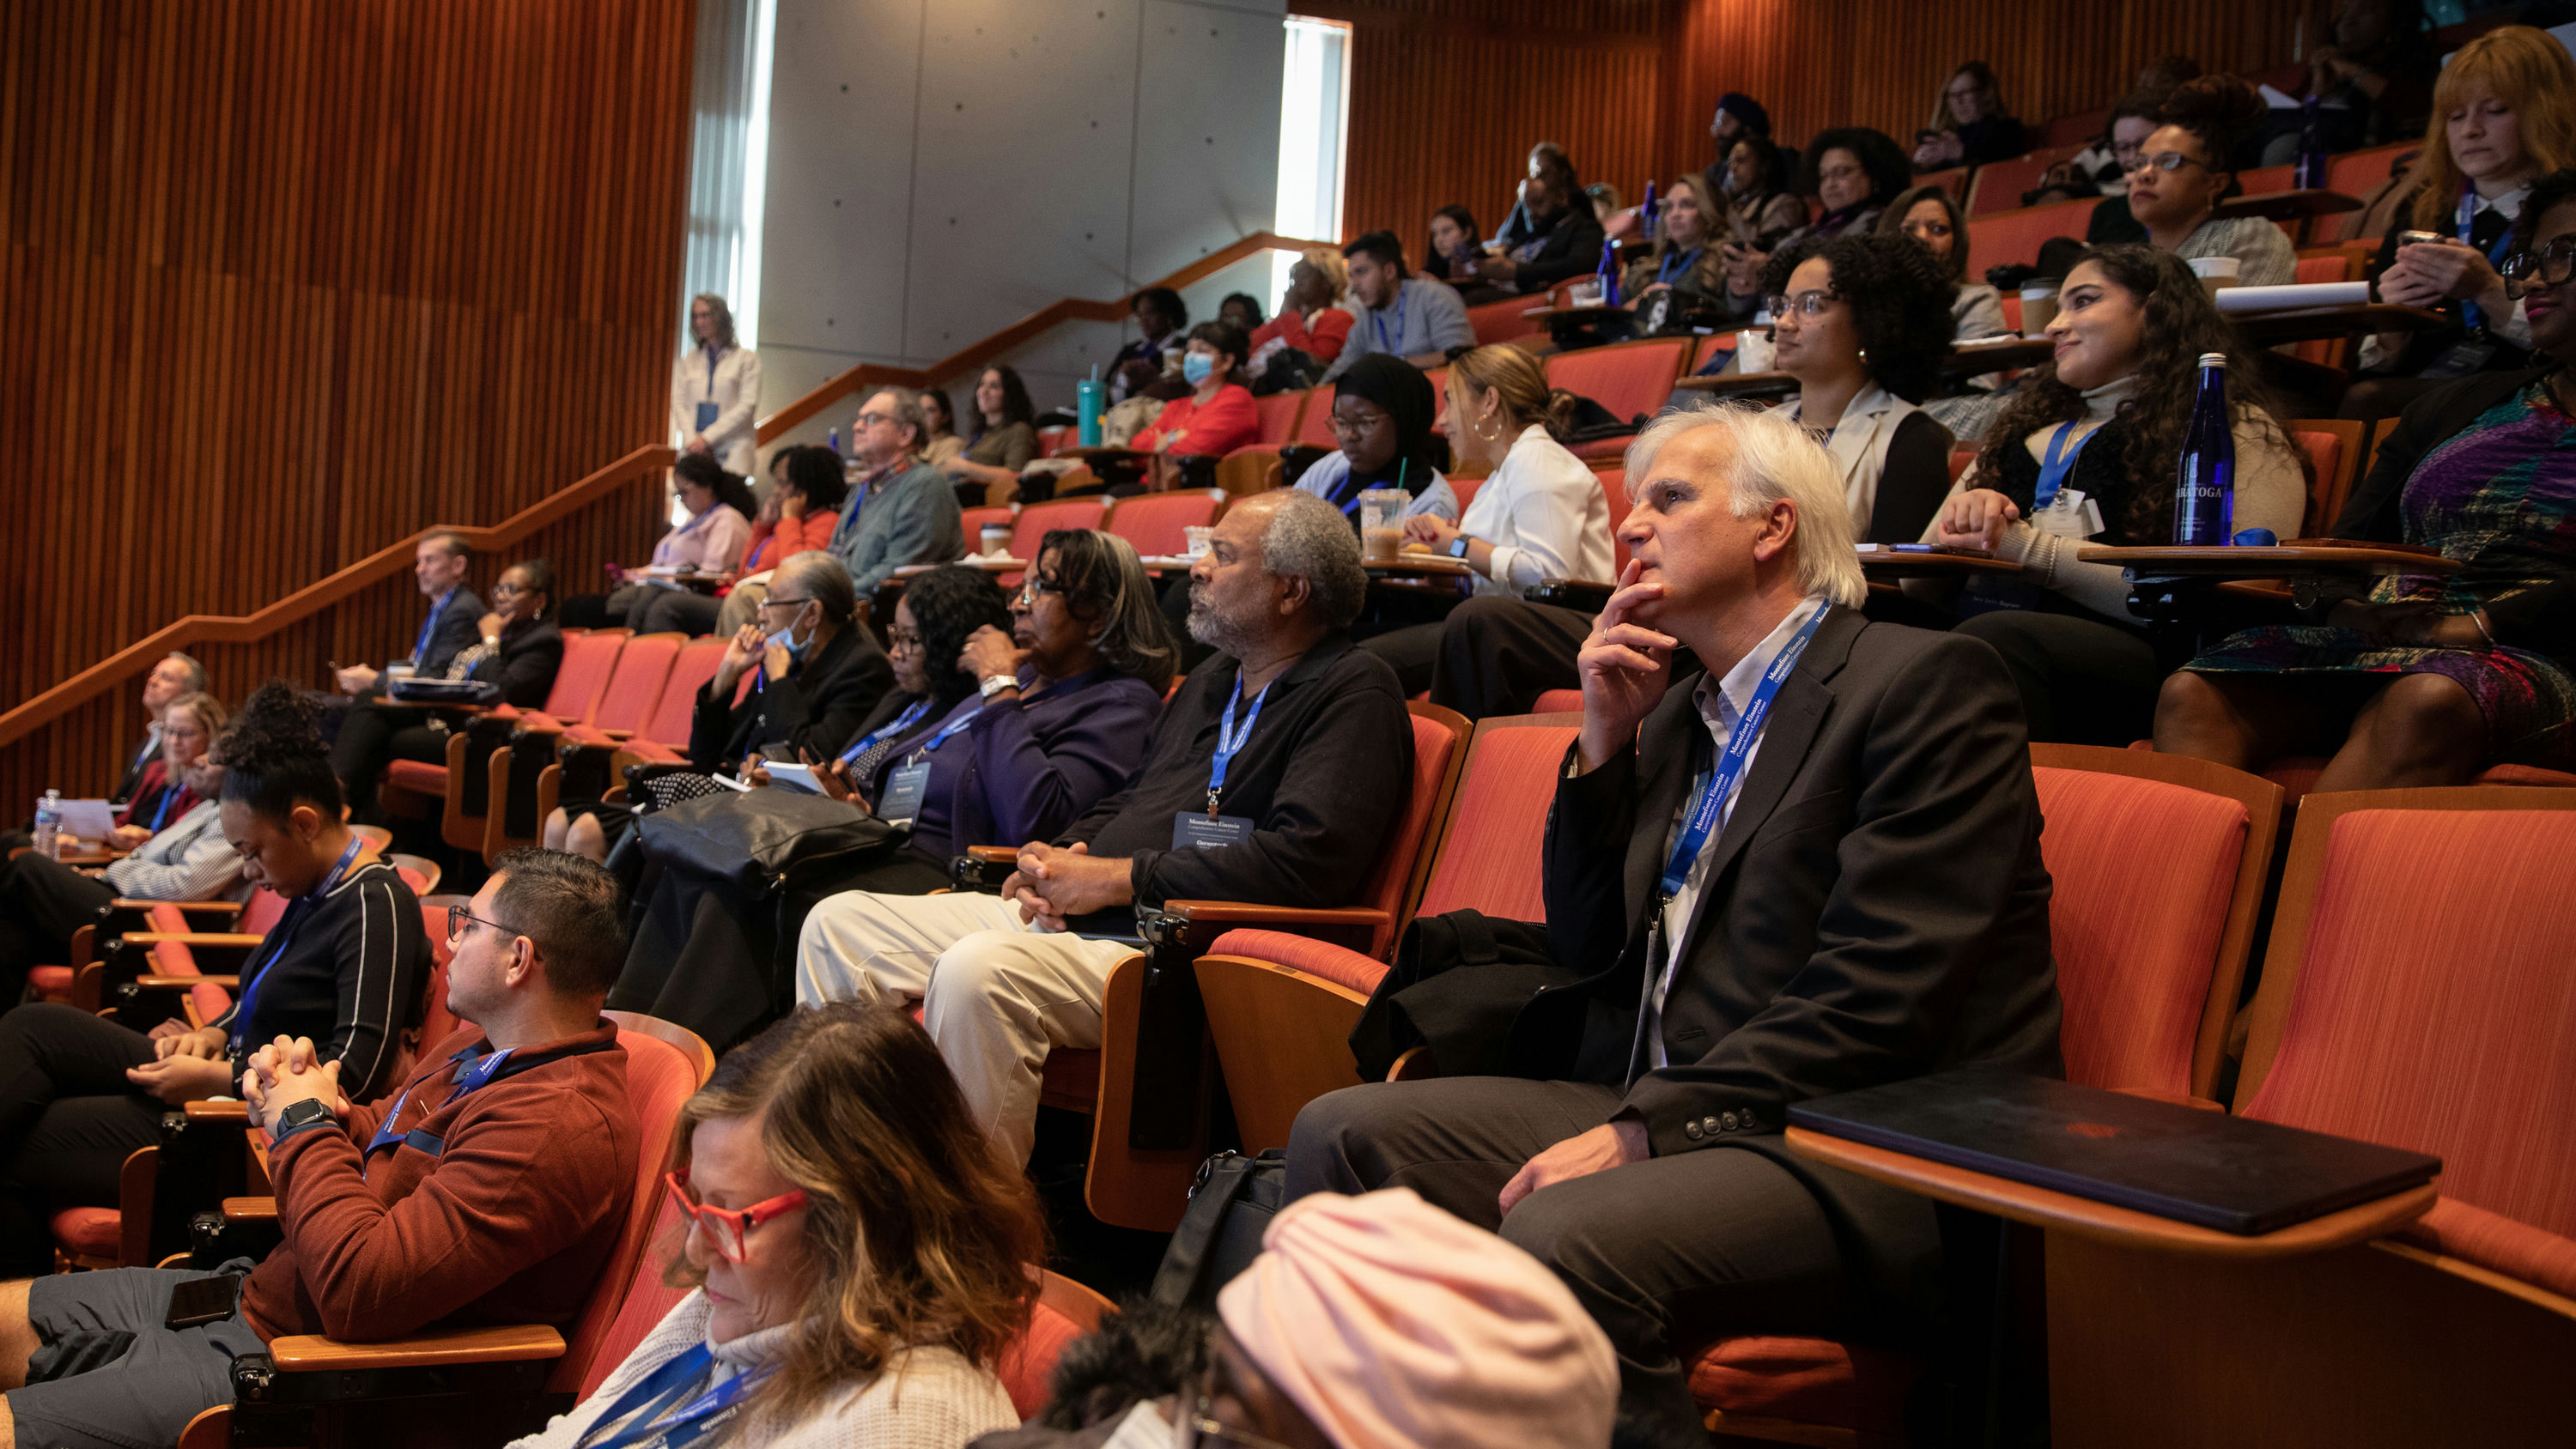 A view of the audience listening to a presenter at the cancer symposium.